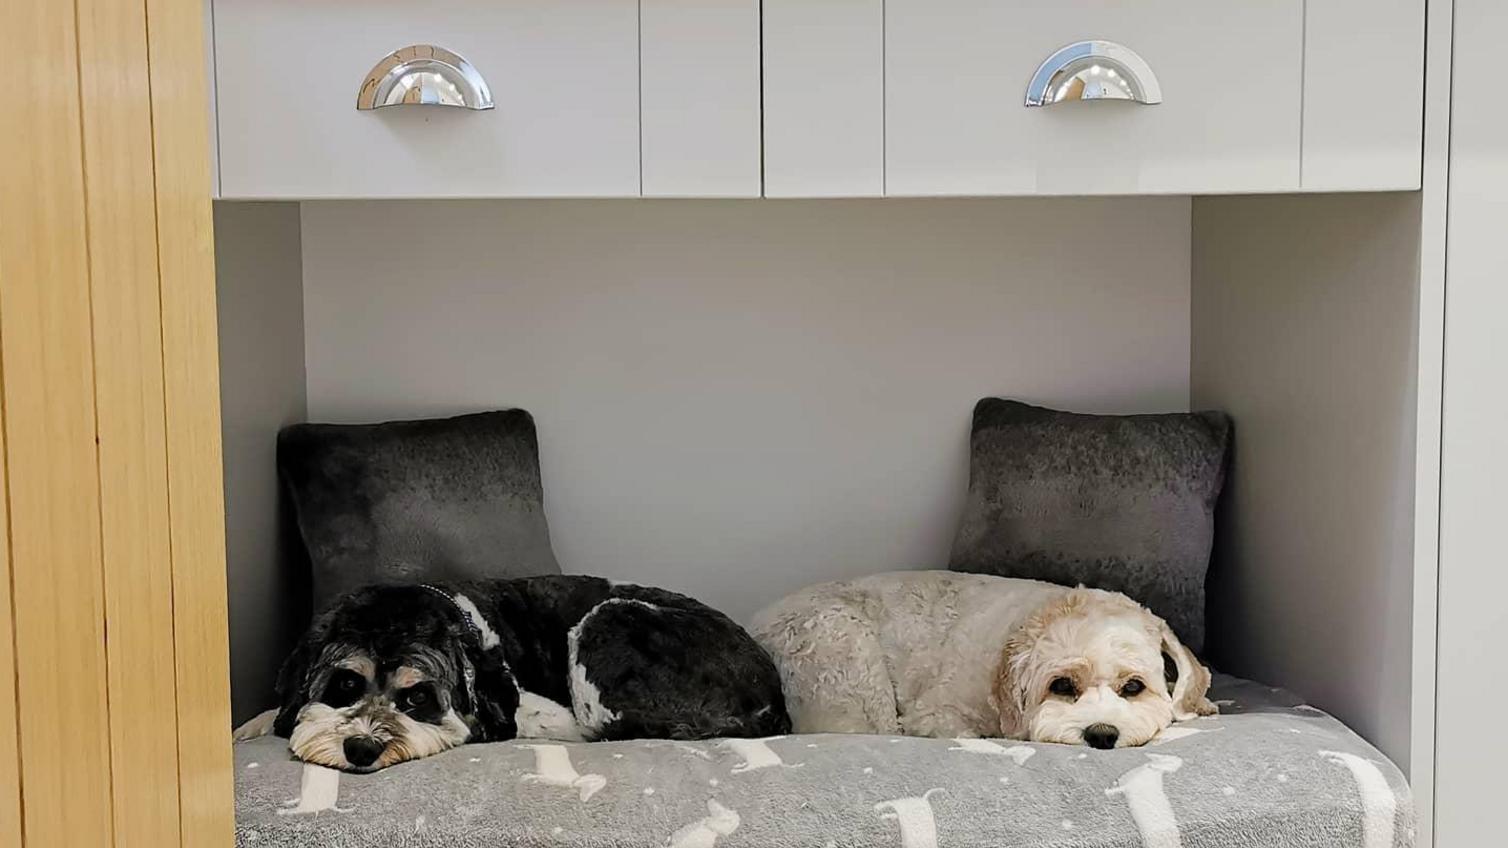 Two dogs lying down on a grey and white dog bed, with a grey shaker style cabinet on top and an oak door in shot.